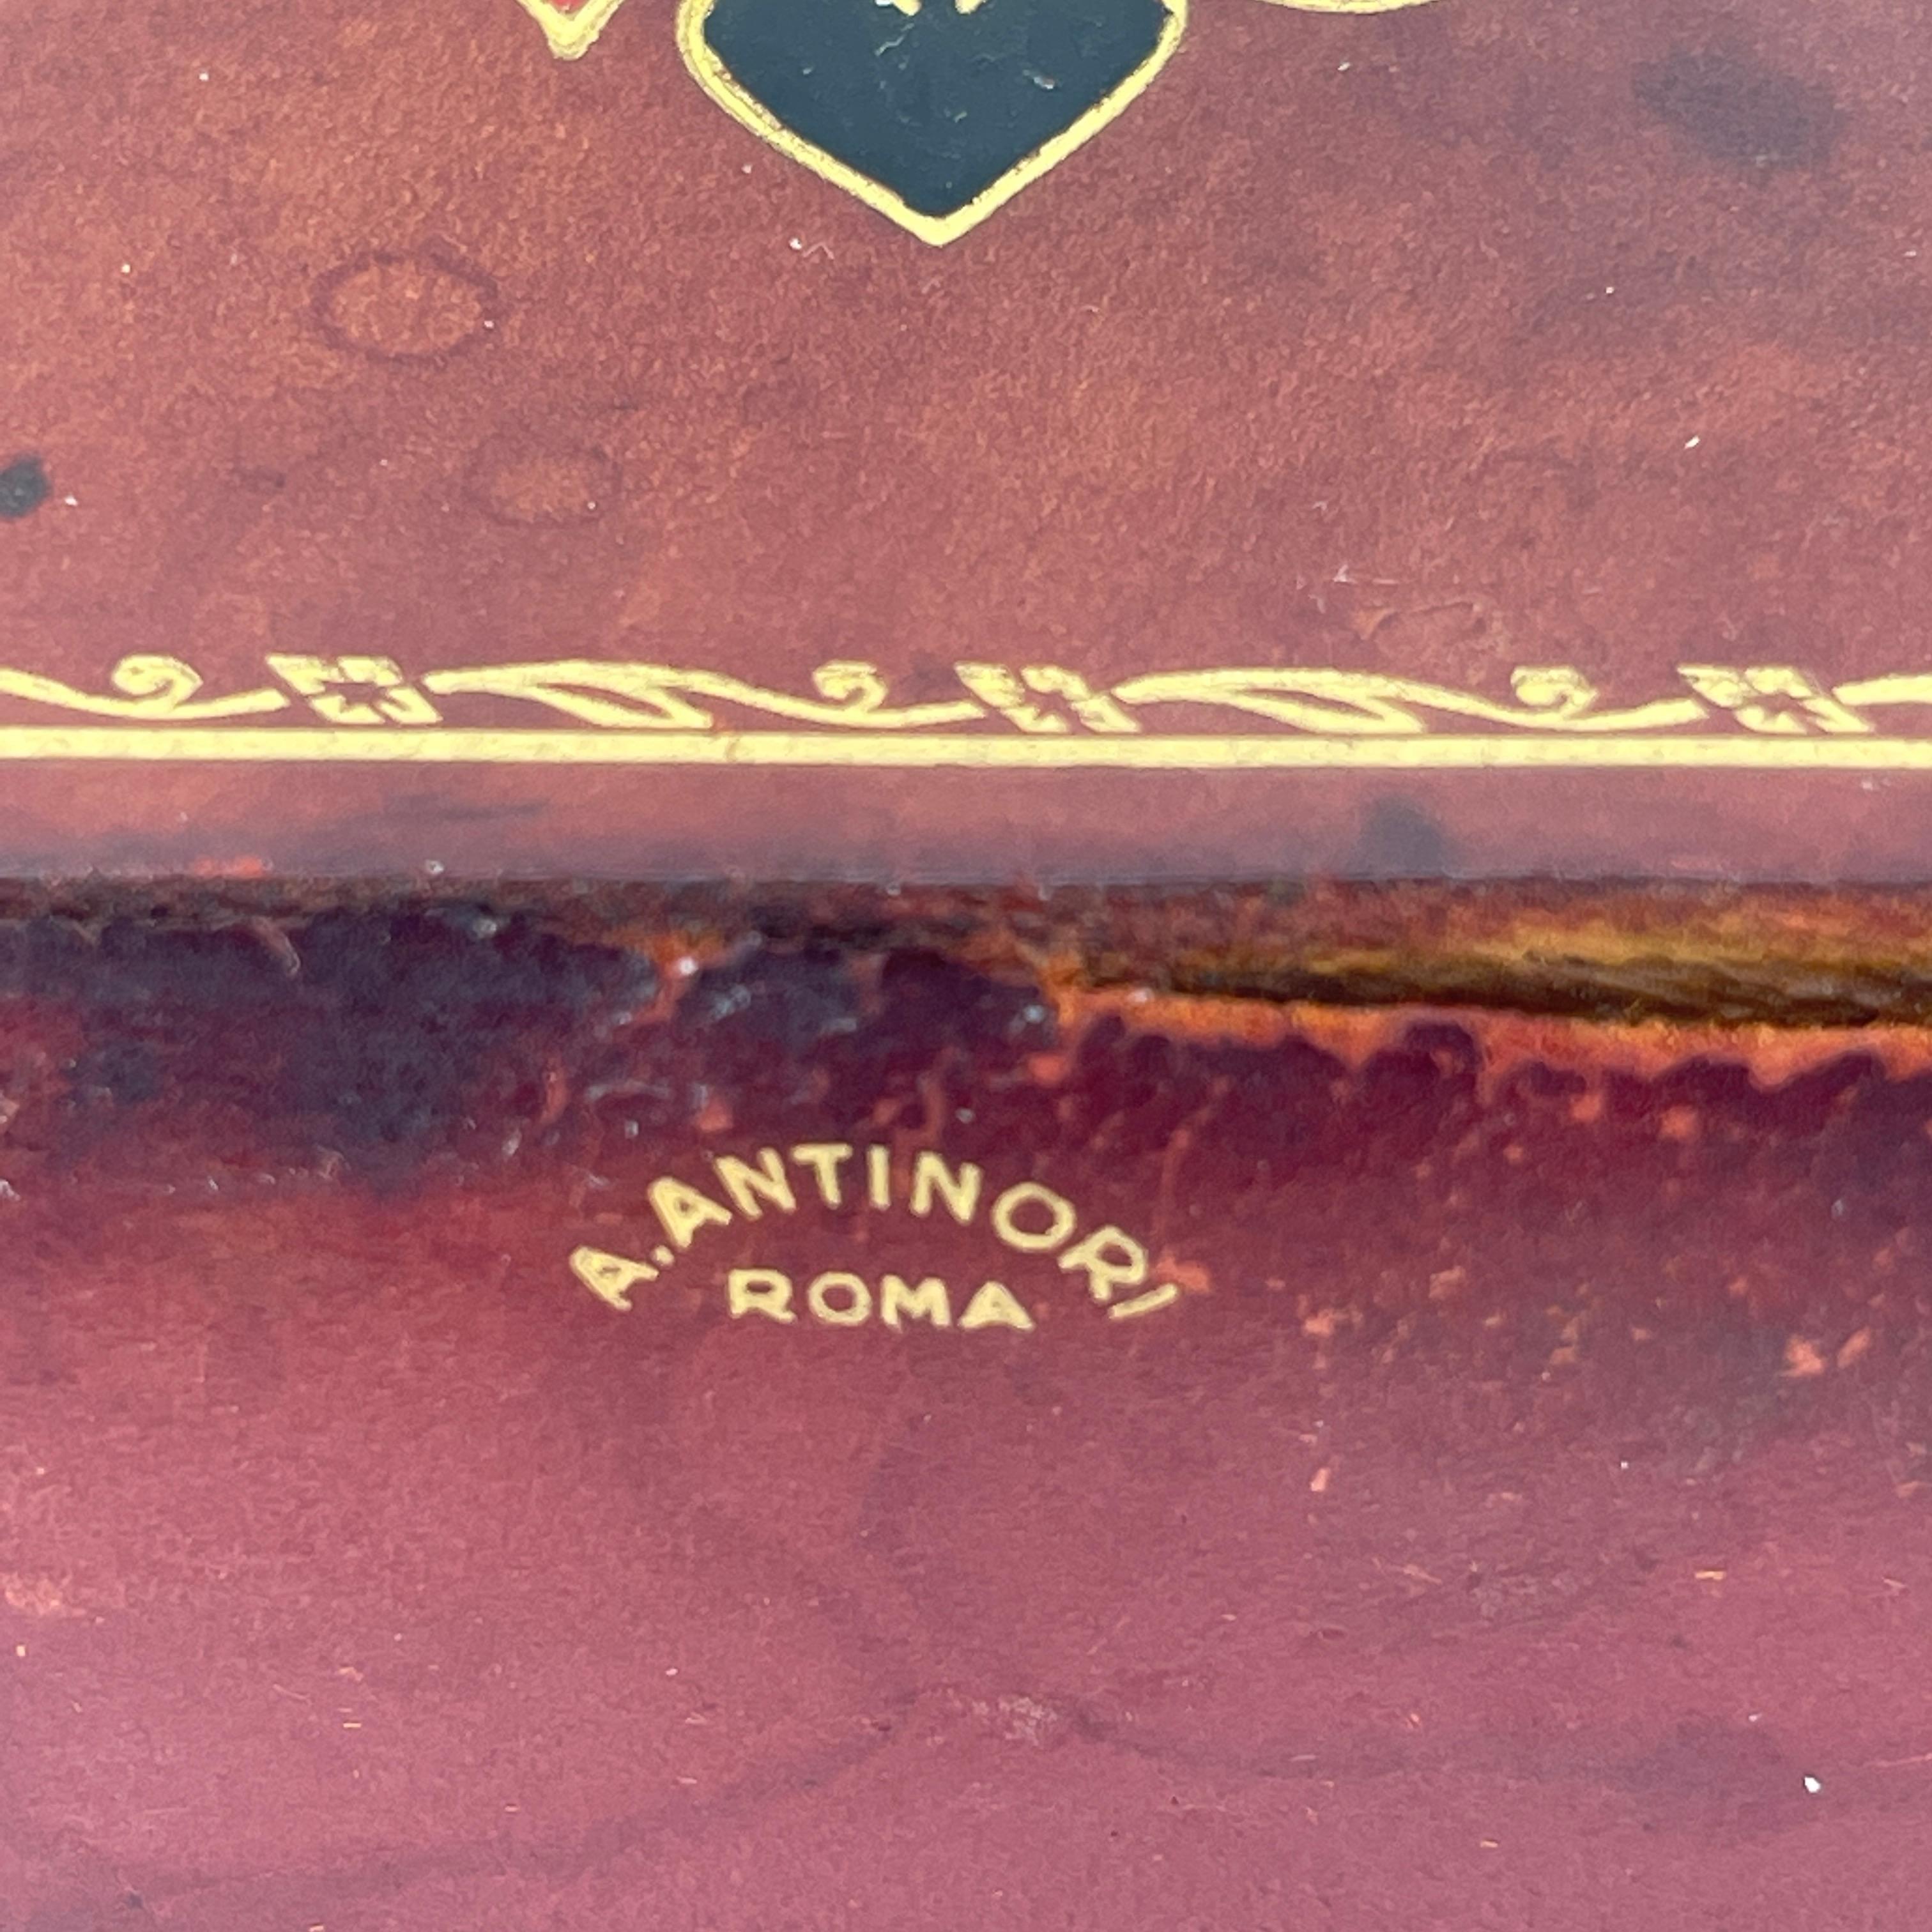 Mid-Century Modern Vintage Italian Red Leather Box for Deck of Cards, Signed A. Antinori Roma